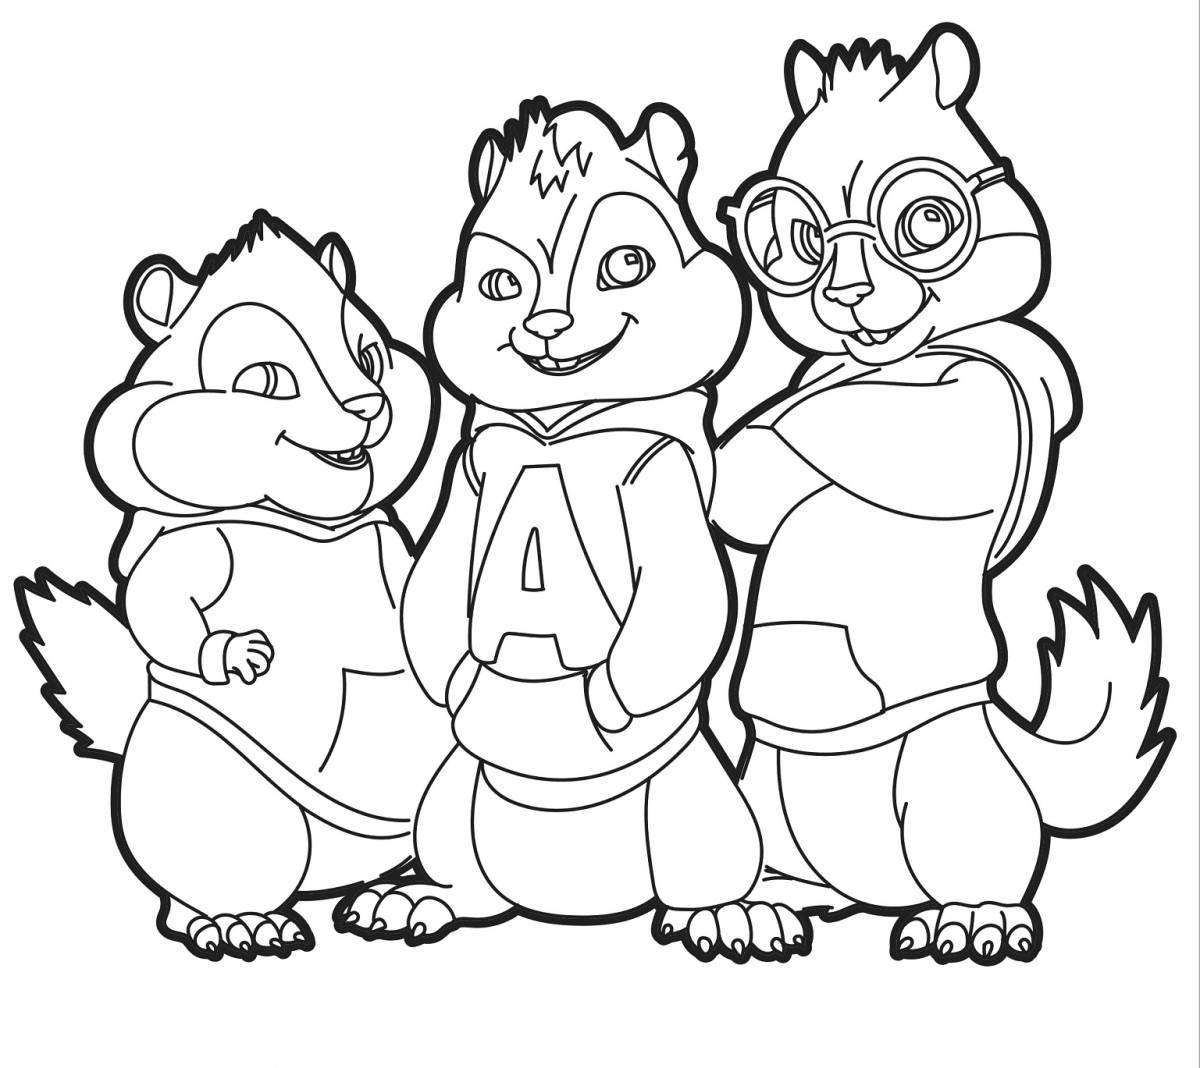 Exquisite chipmunk coloring book for kids